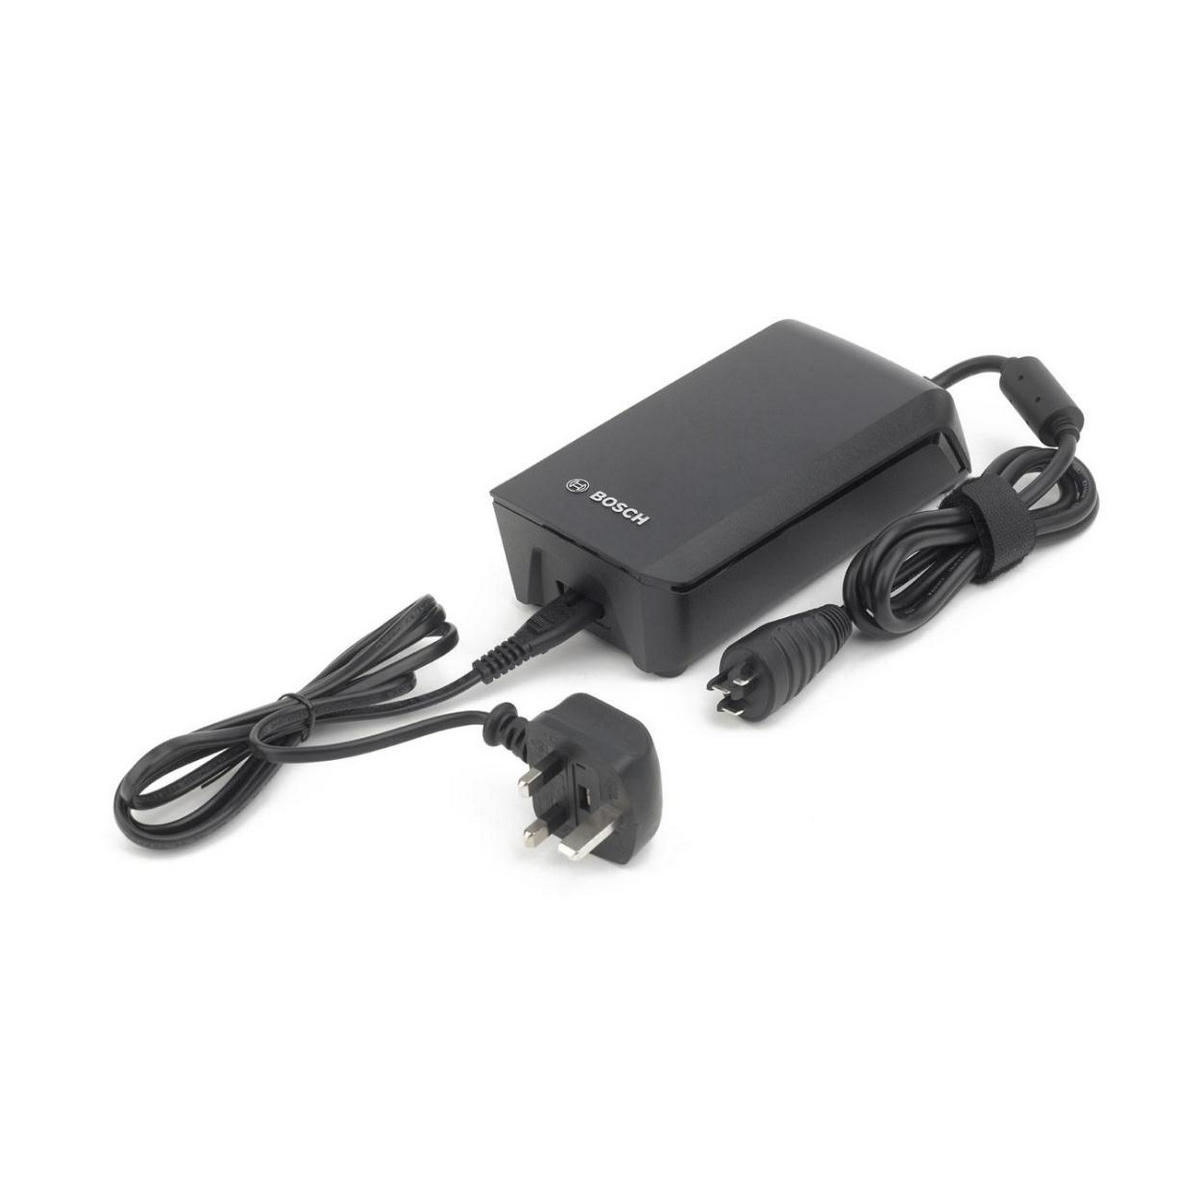 Battery charger 6a fastcharger power cable uk 2019